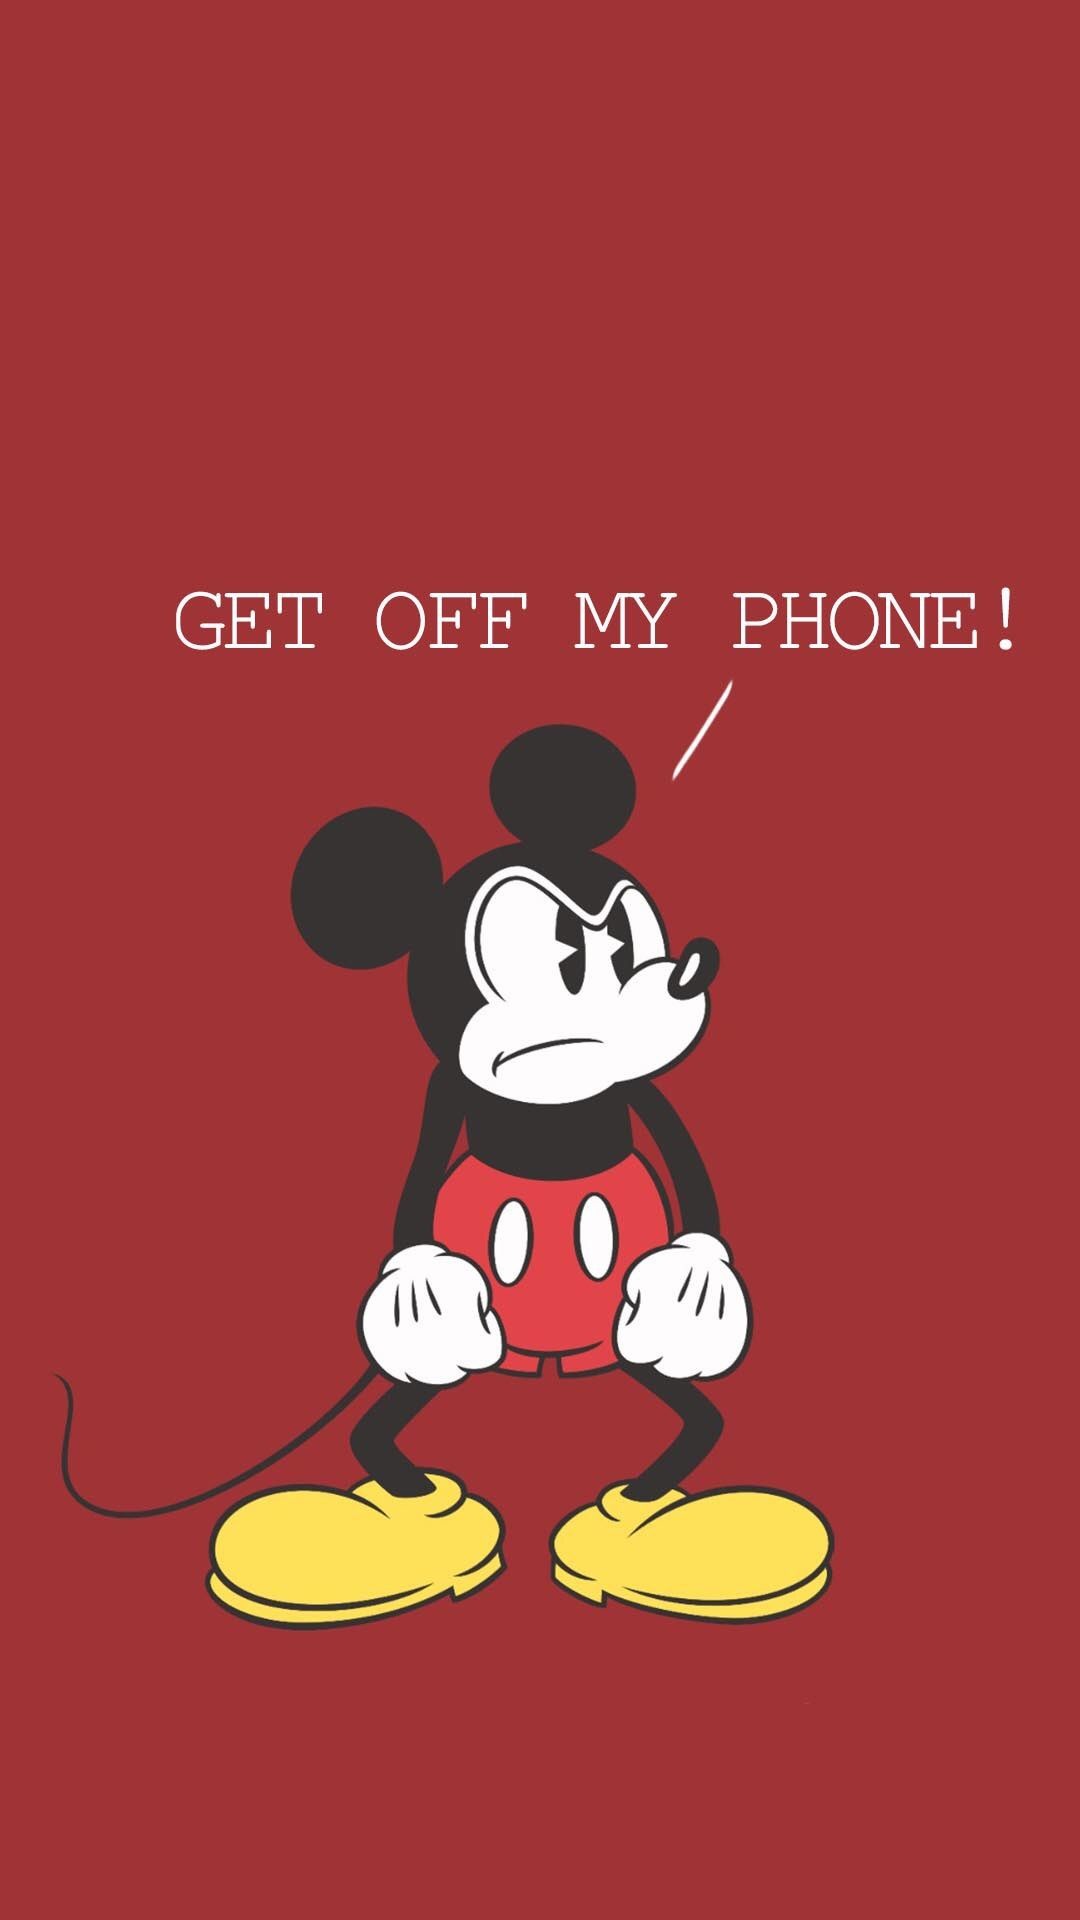 1080x1920 Perfect Mickey mouse wallpapers Mobile Wallpaper, Wallpaper Ideas, Tumblr  Wallpaper, Wallpaper Backgrounds,